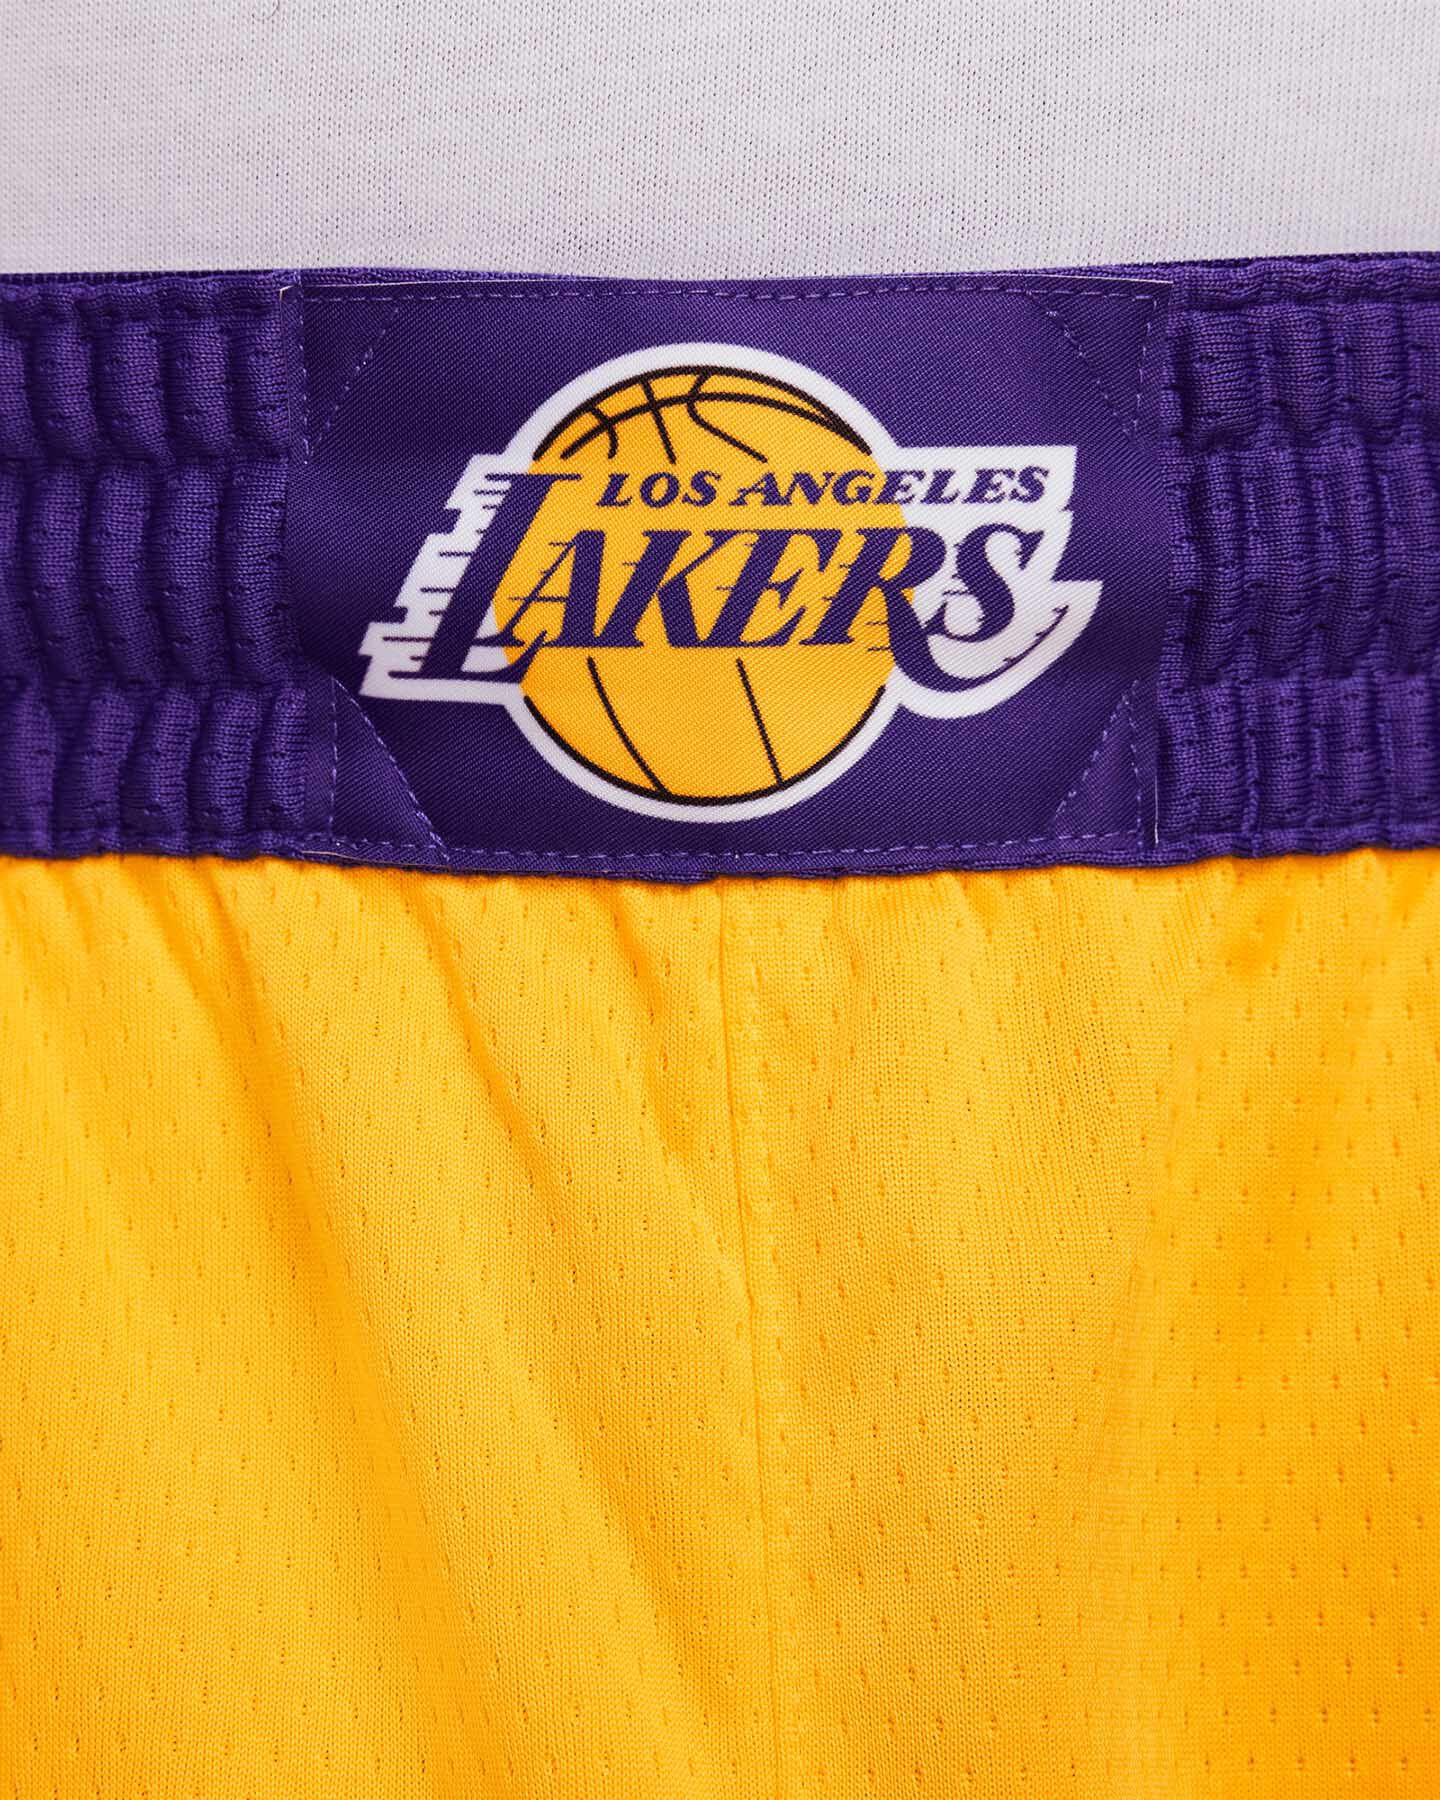  Pantaloncini basket NIKE LOS ANGELES LAKERS M S4046590|728|S scatto 6